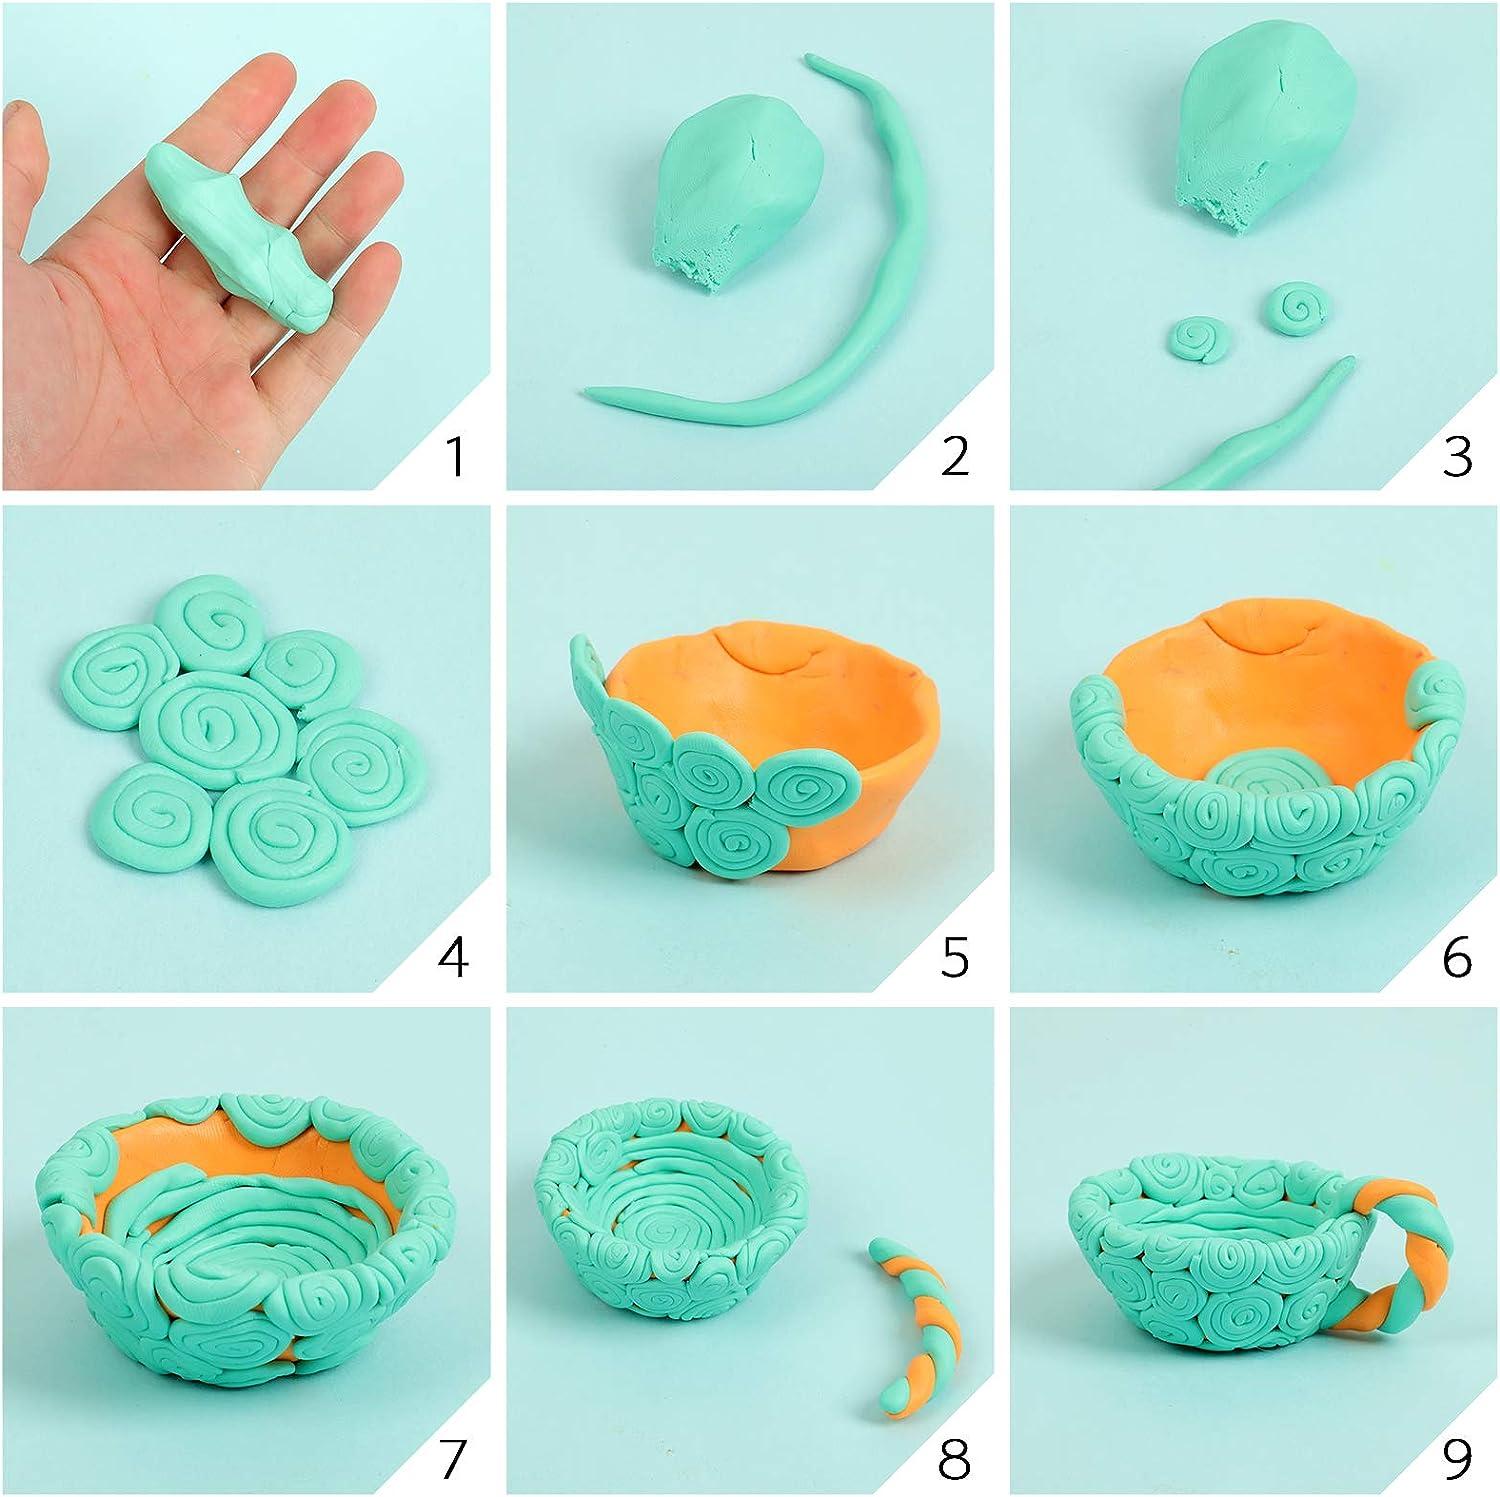 Polymer Clay Kits, Oven Bake Clay Model Clay, Safe and Non-Toxic DIY Modeling Clay, Sculpting Clay Tools and Accessories,Ideal Gift for Children, Adul